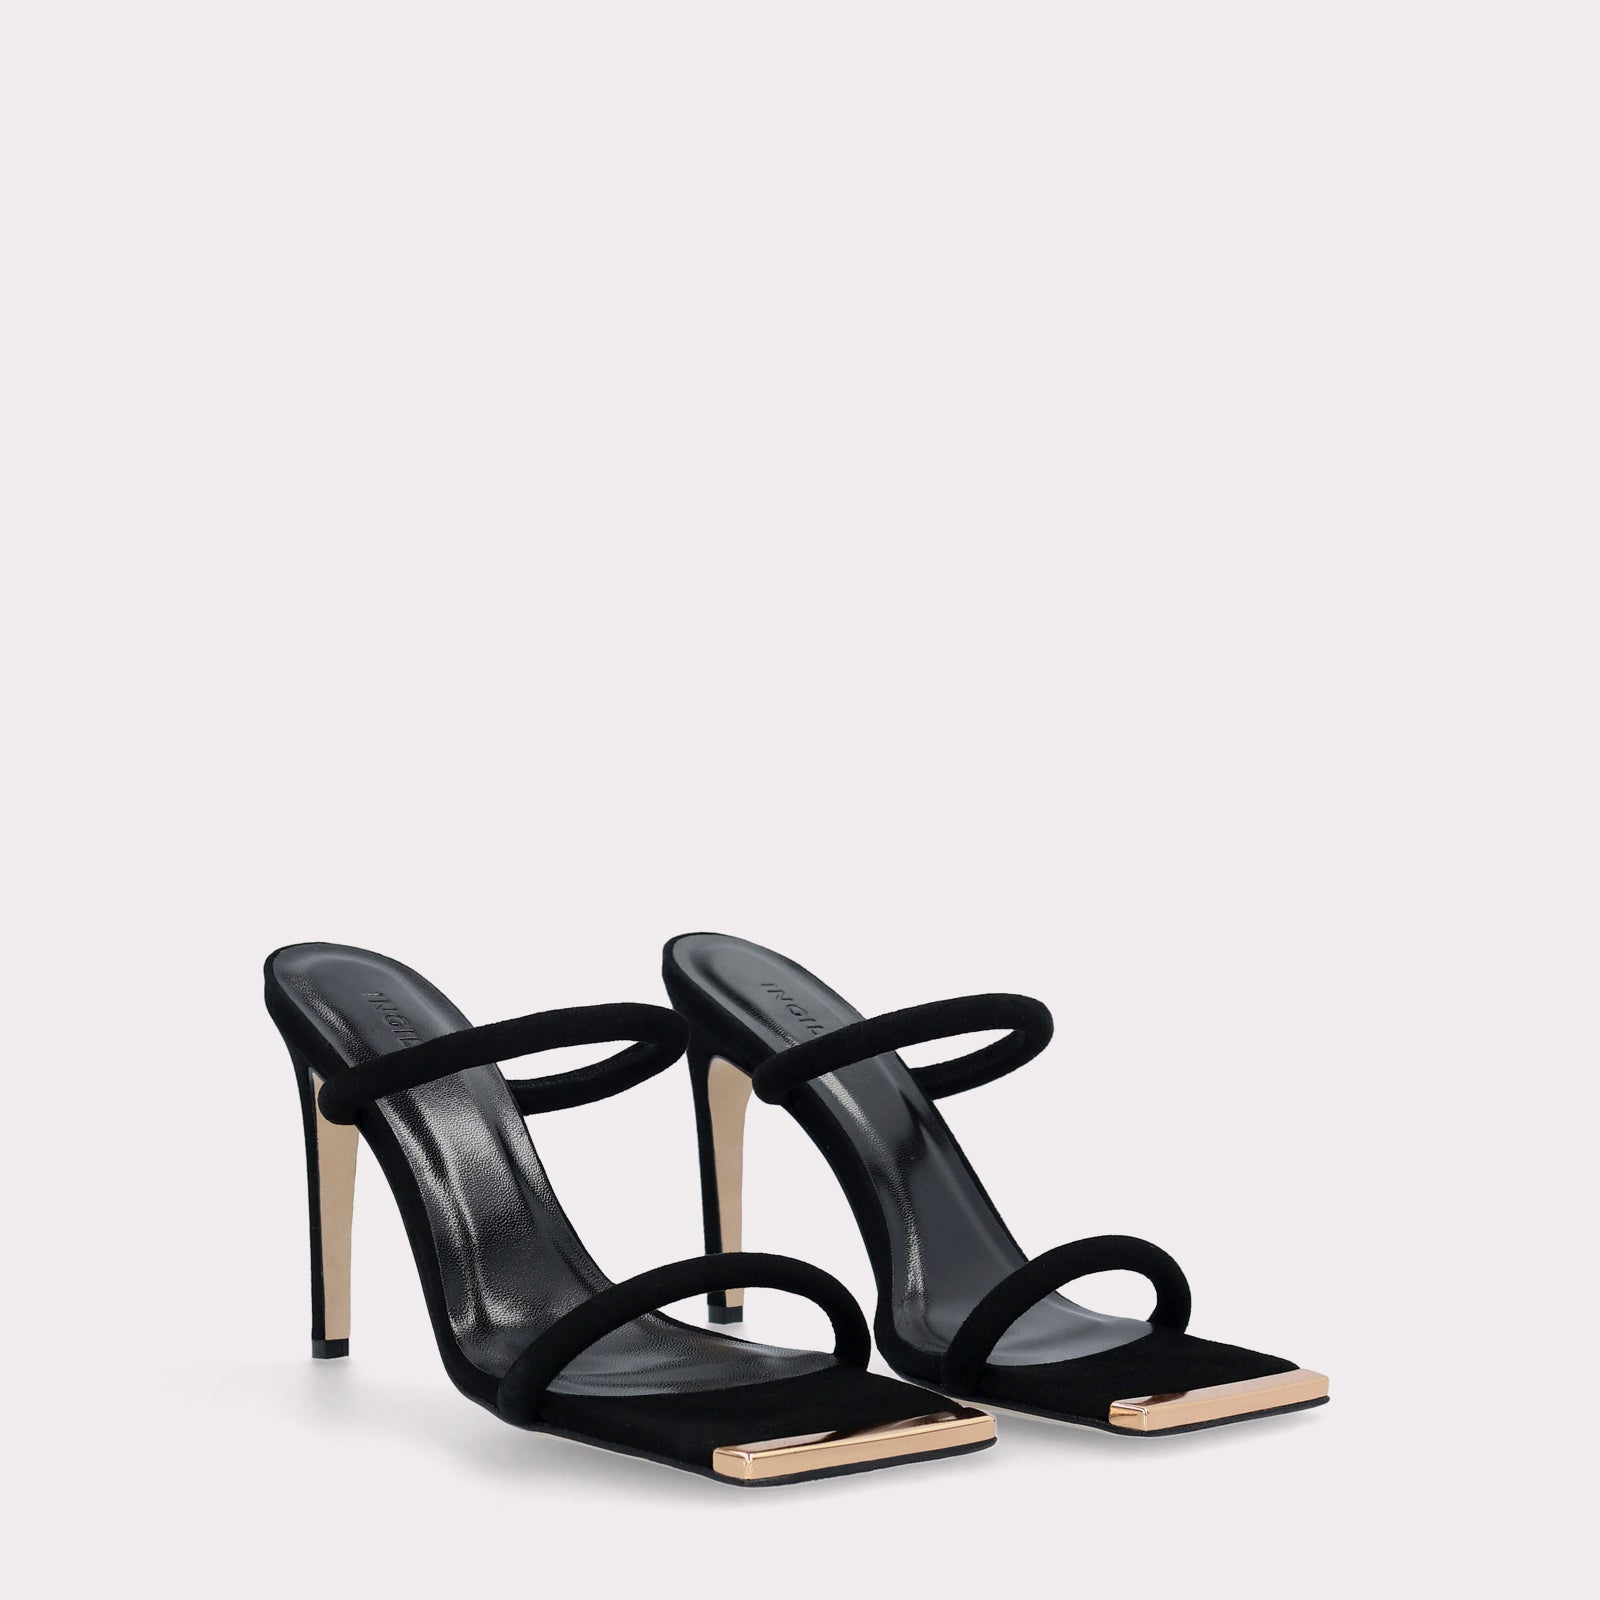 KATERINA BLACK SUEDE LEATHER MULES